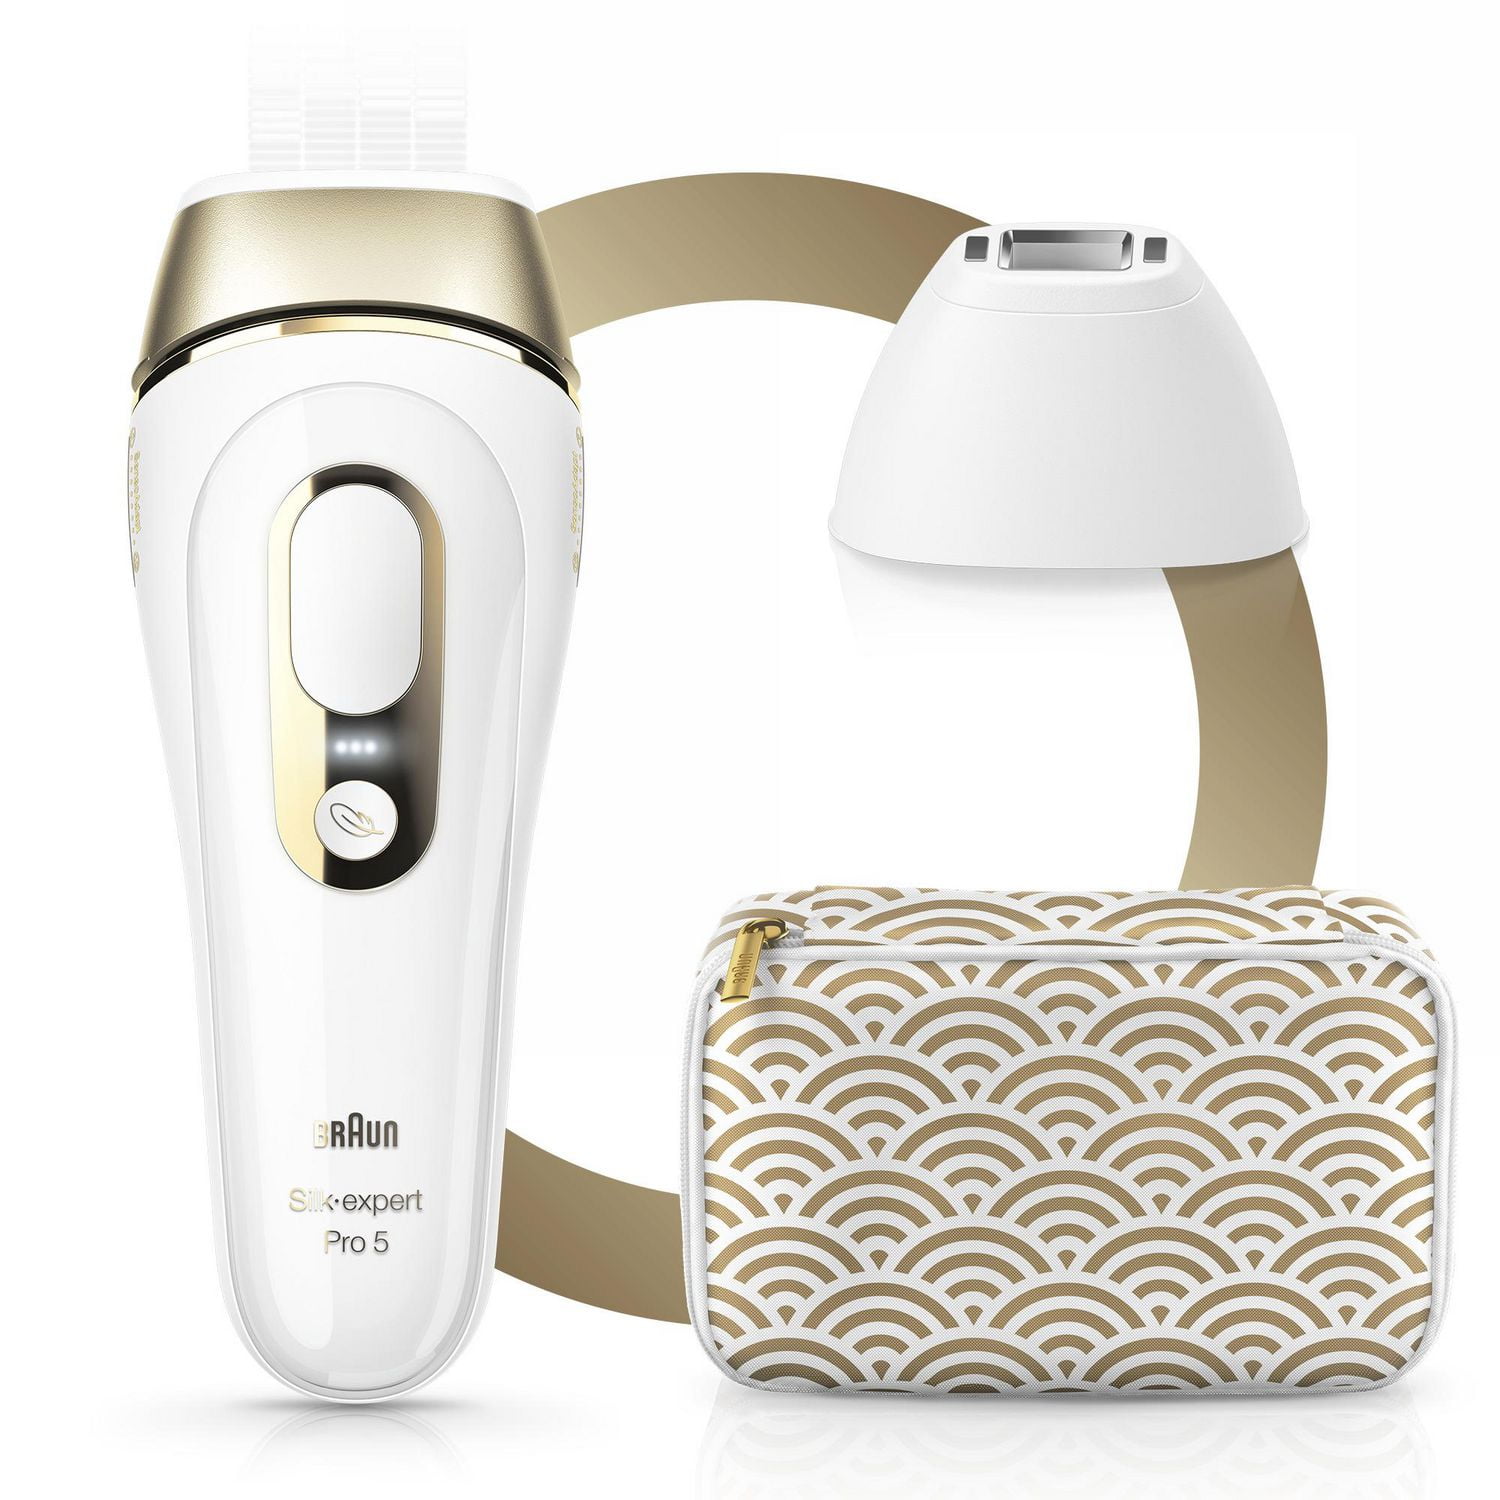 Braun Silk·expert Pro 5 PL5137 IPL, At-Home Hair Removal System, White&Gold  